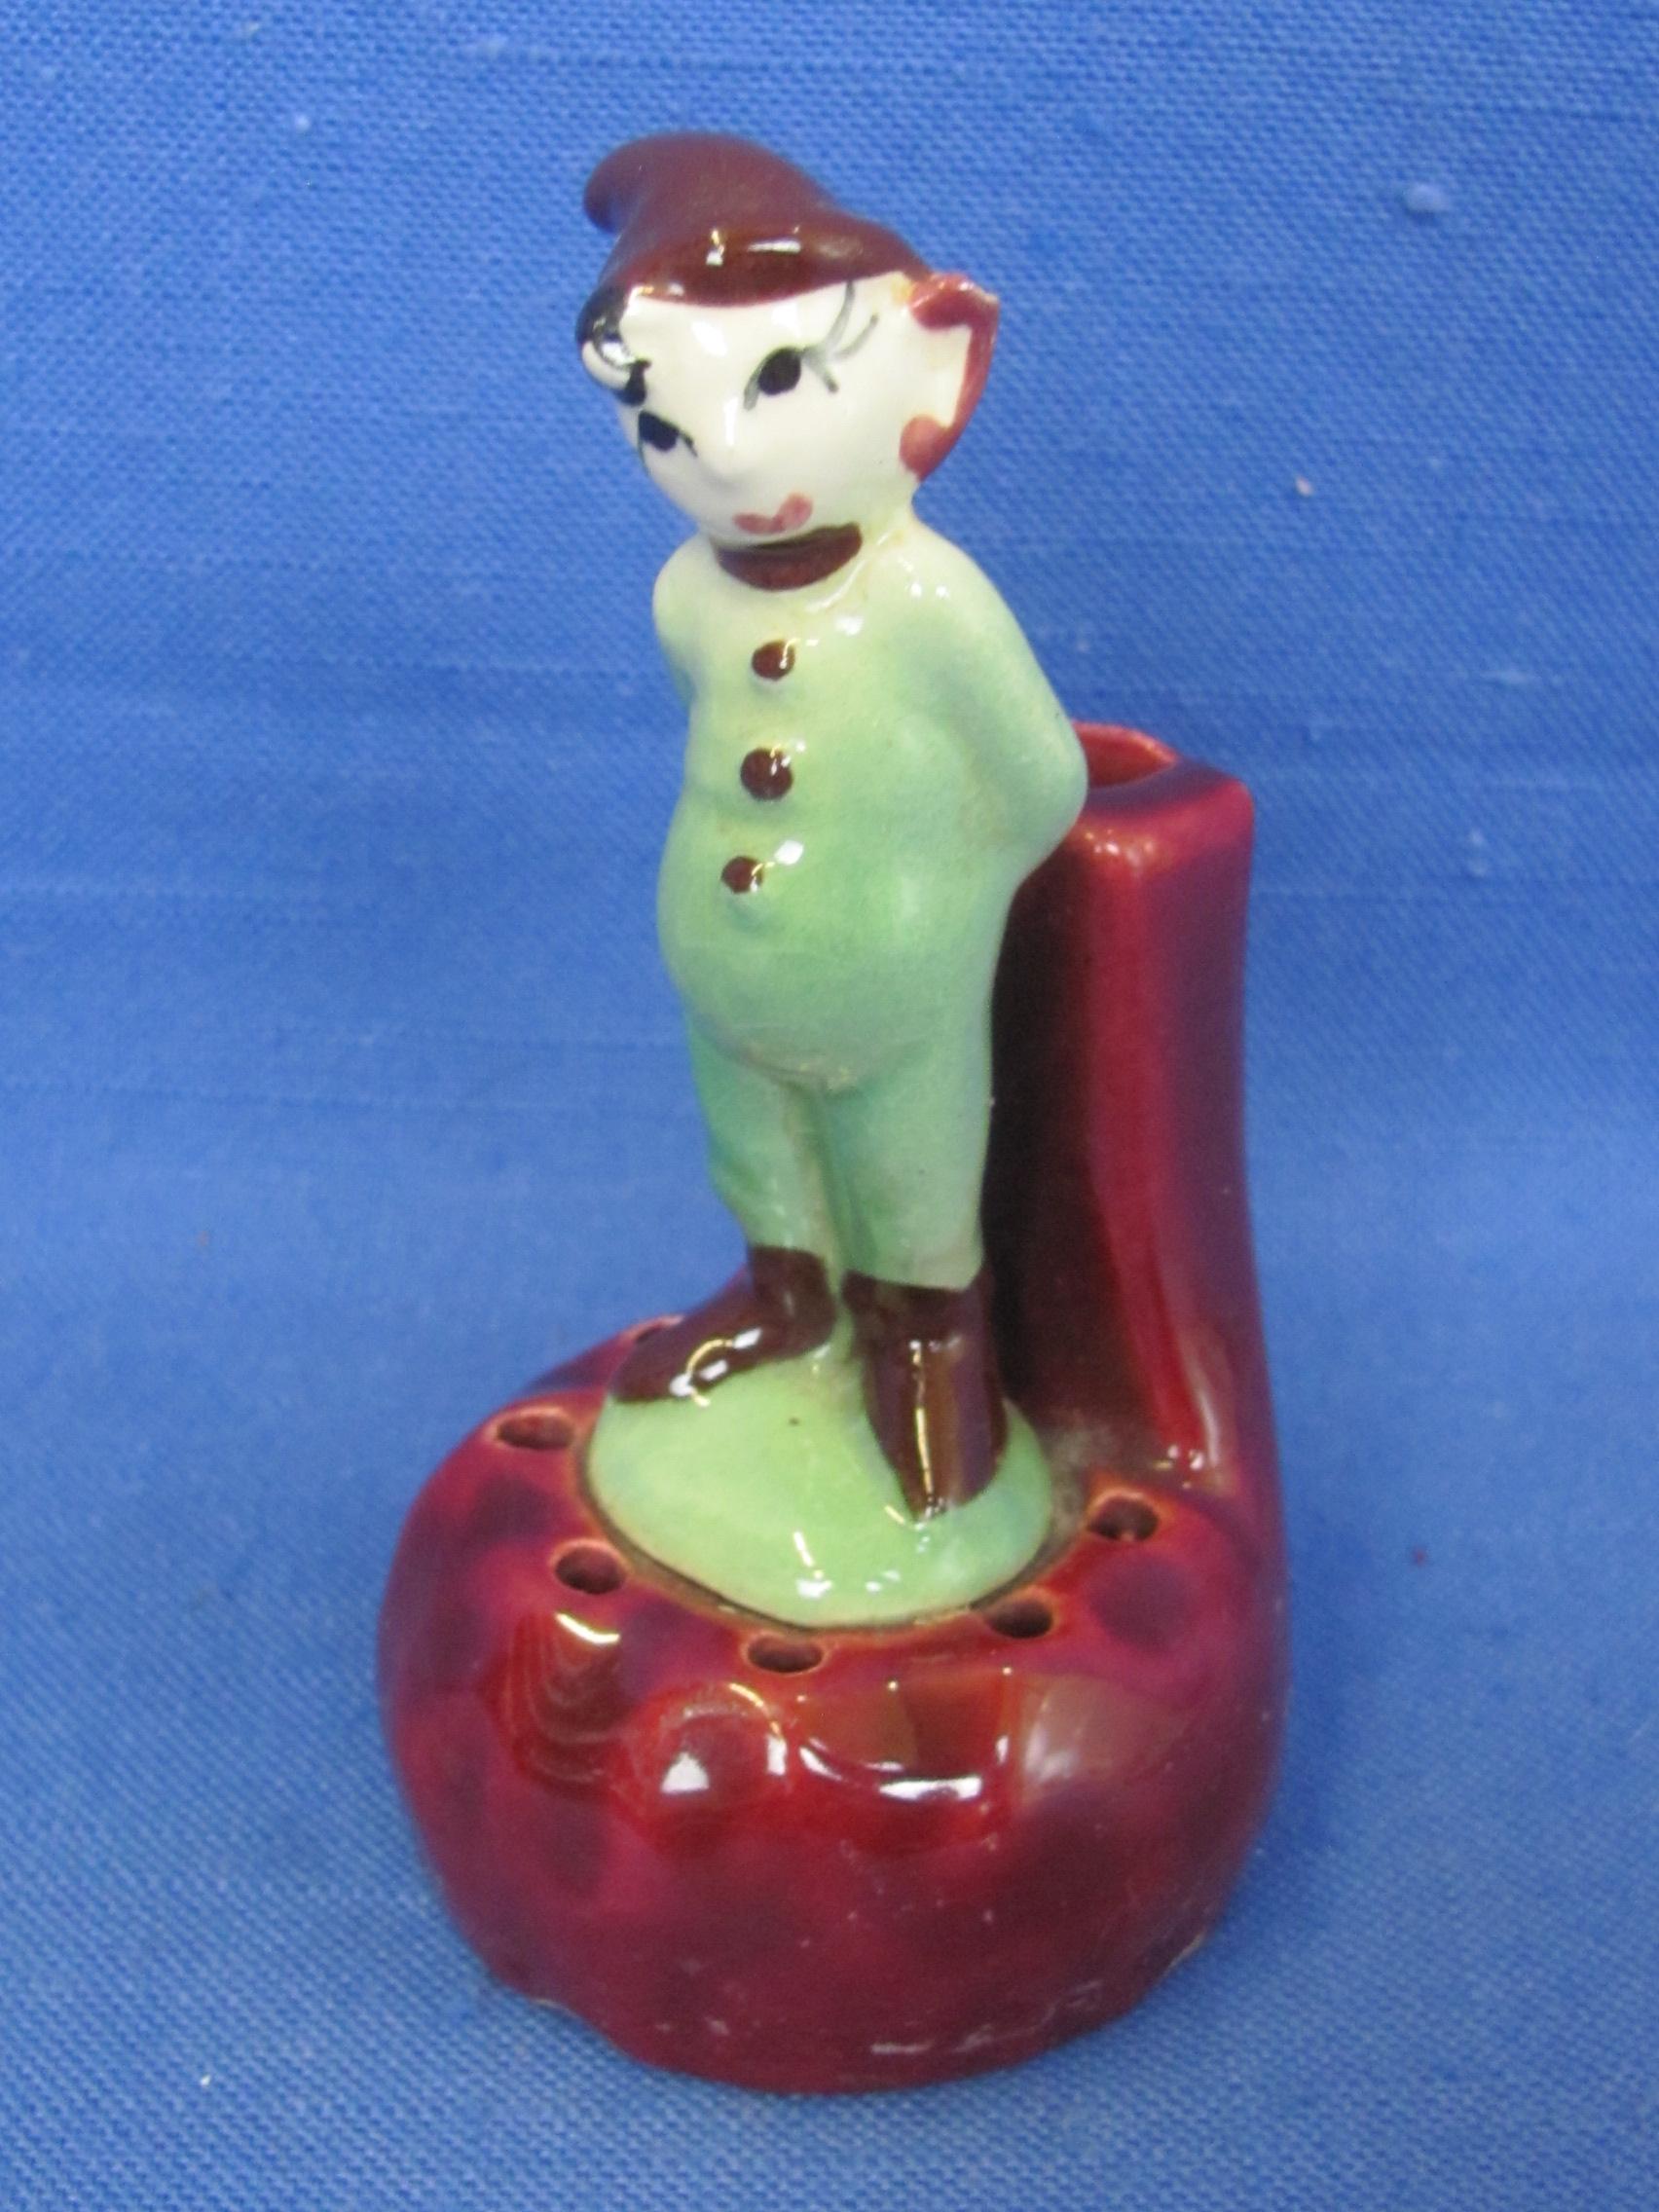 Vintage Pottery Pixie Flower Frog & Bud Vase – 4 1/4” tall – Good condition